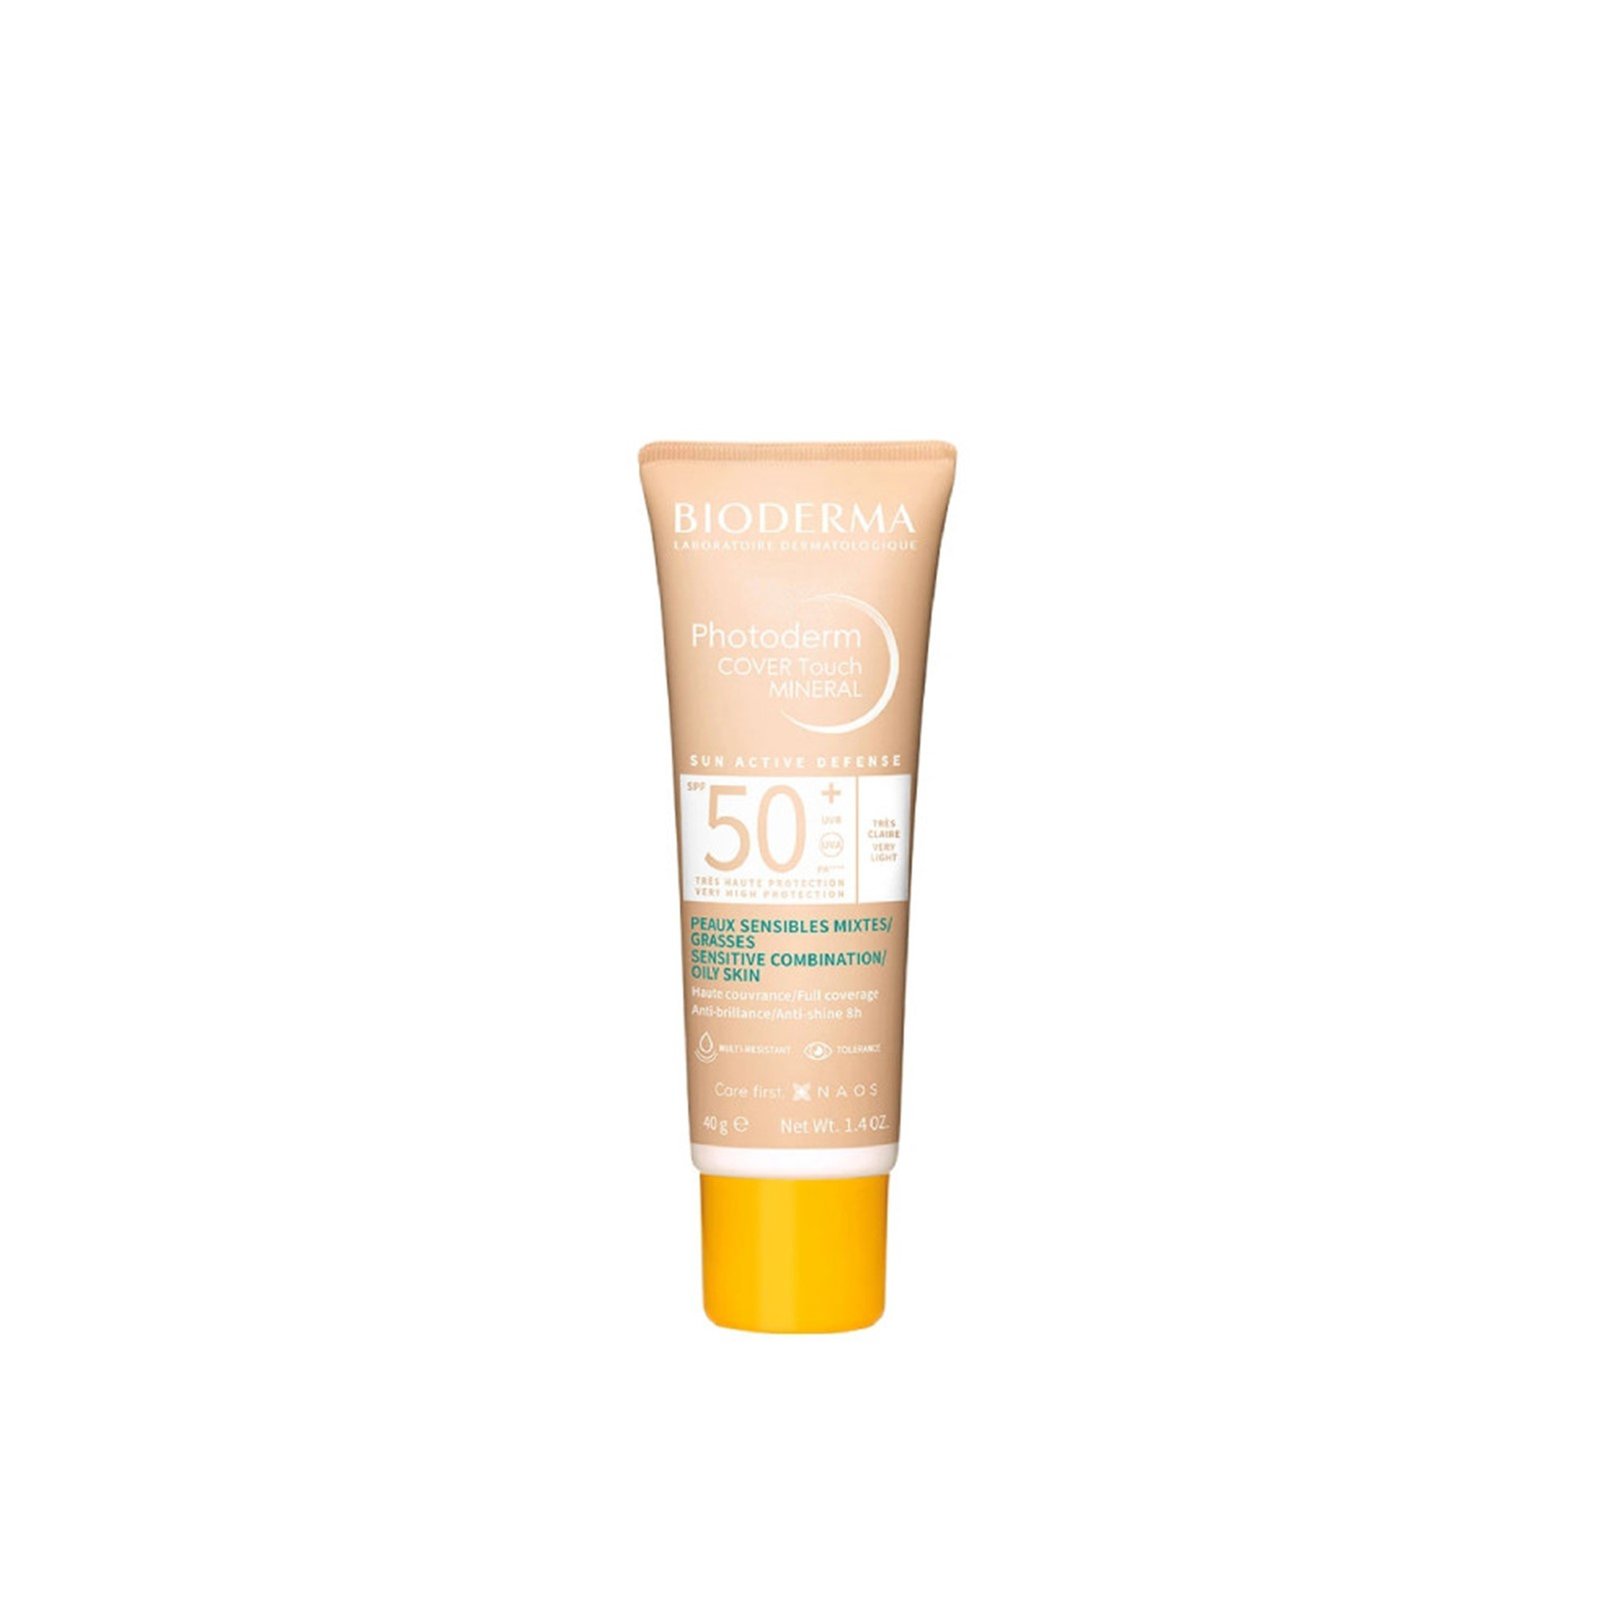 Bioderma Photoderm Cover Touch Mineral SPF50+ Very Light 40g